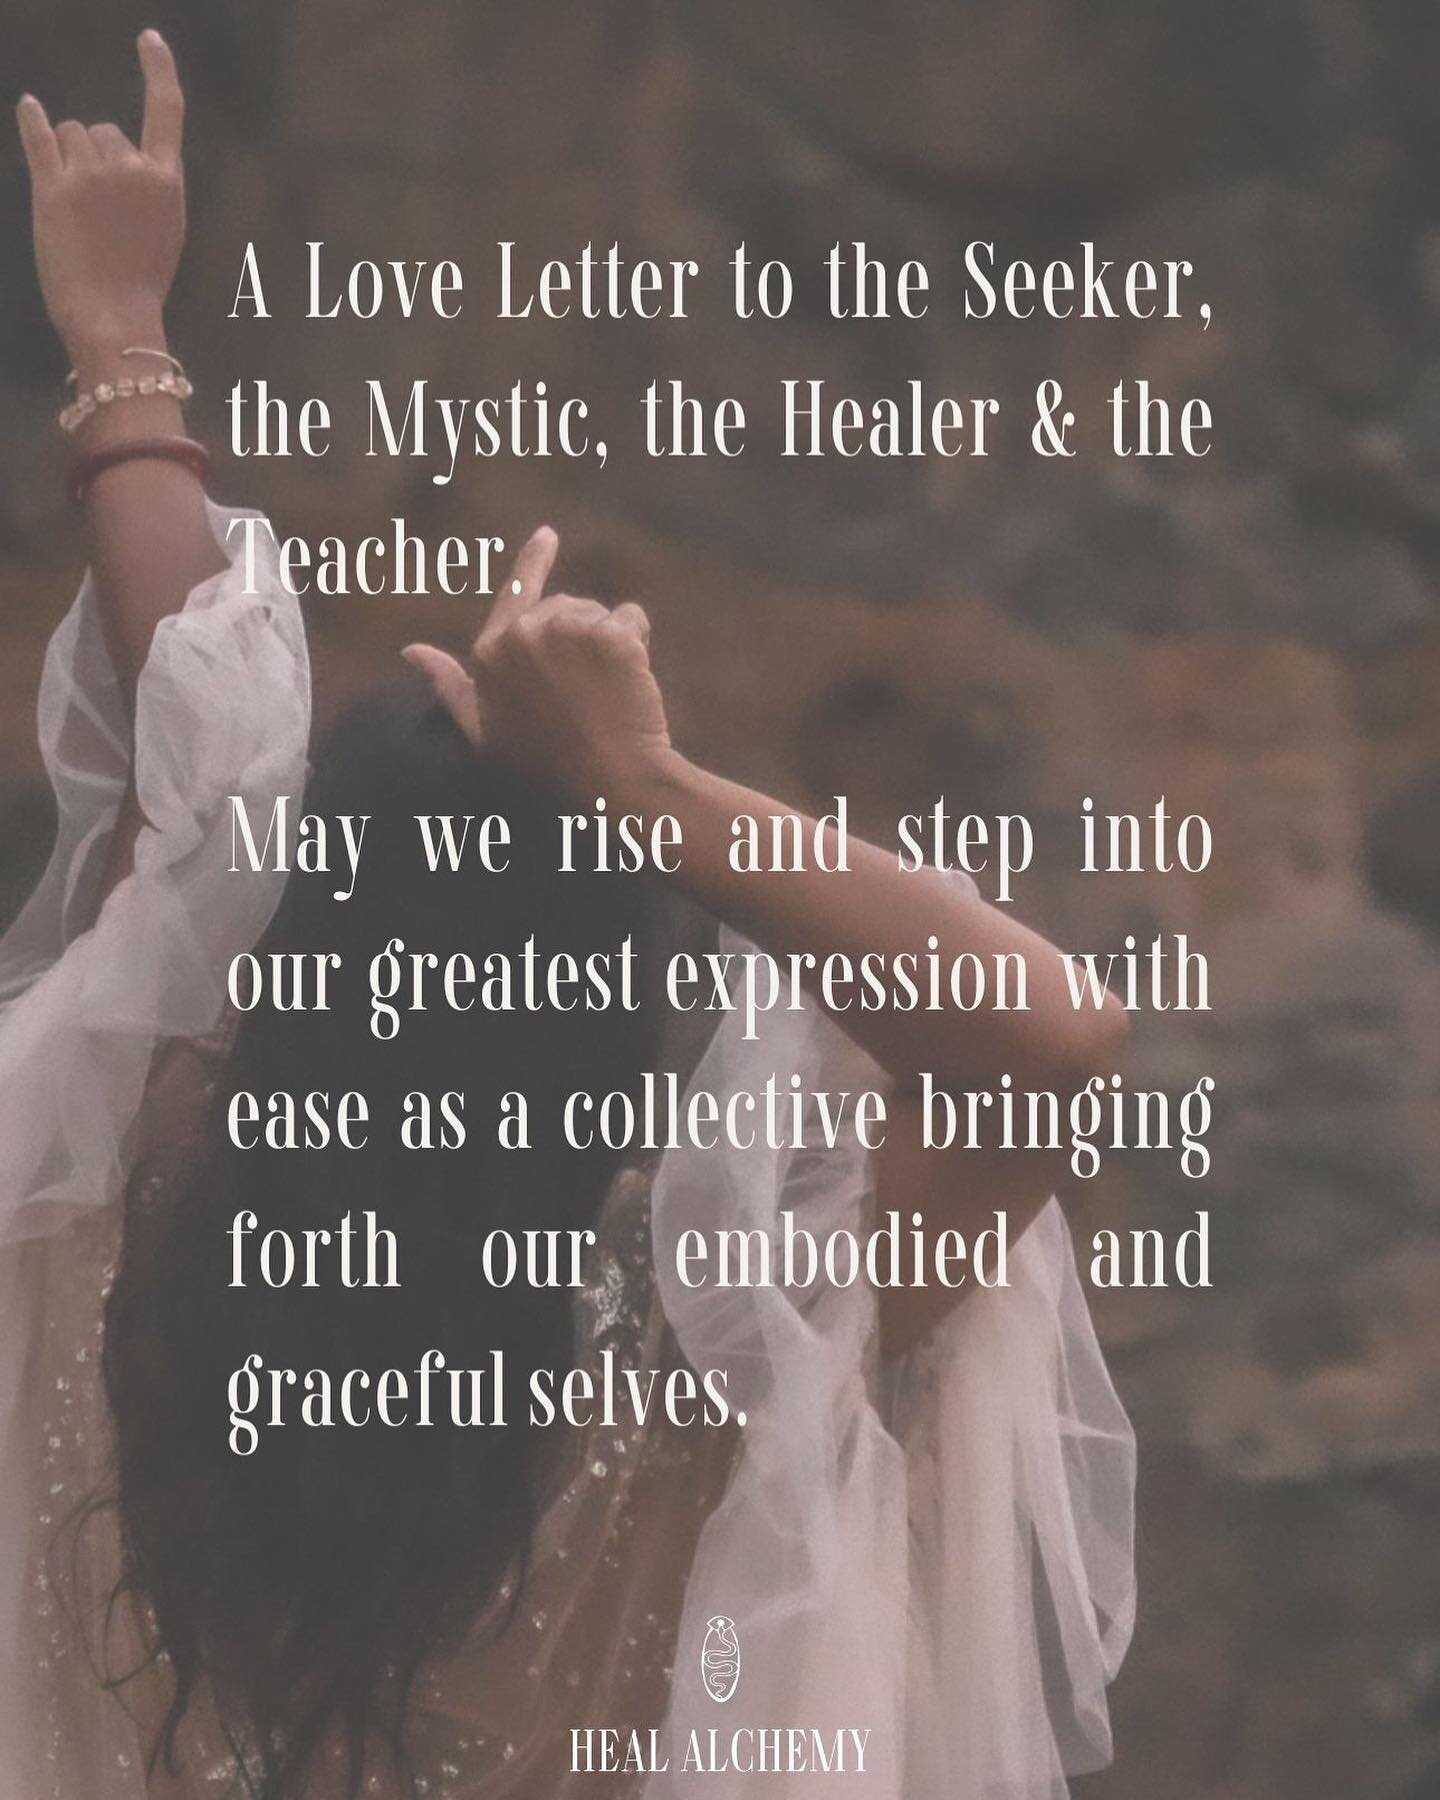 A Love Letter to the Seeker, the Mystic, the Healer &amp; the Teacher.

May we rise and step into our greatest expression with ease as a collective bringing forth our embodied and graceful selves.

Tag an embodied Sister or Brother you are grateful t